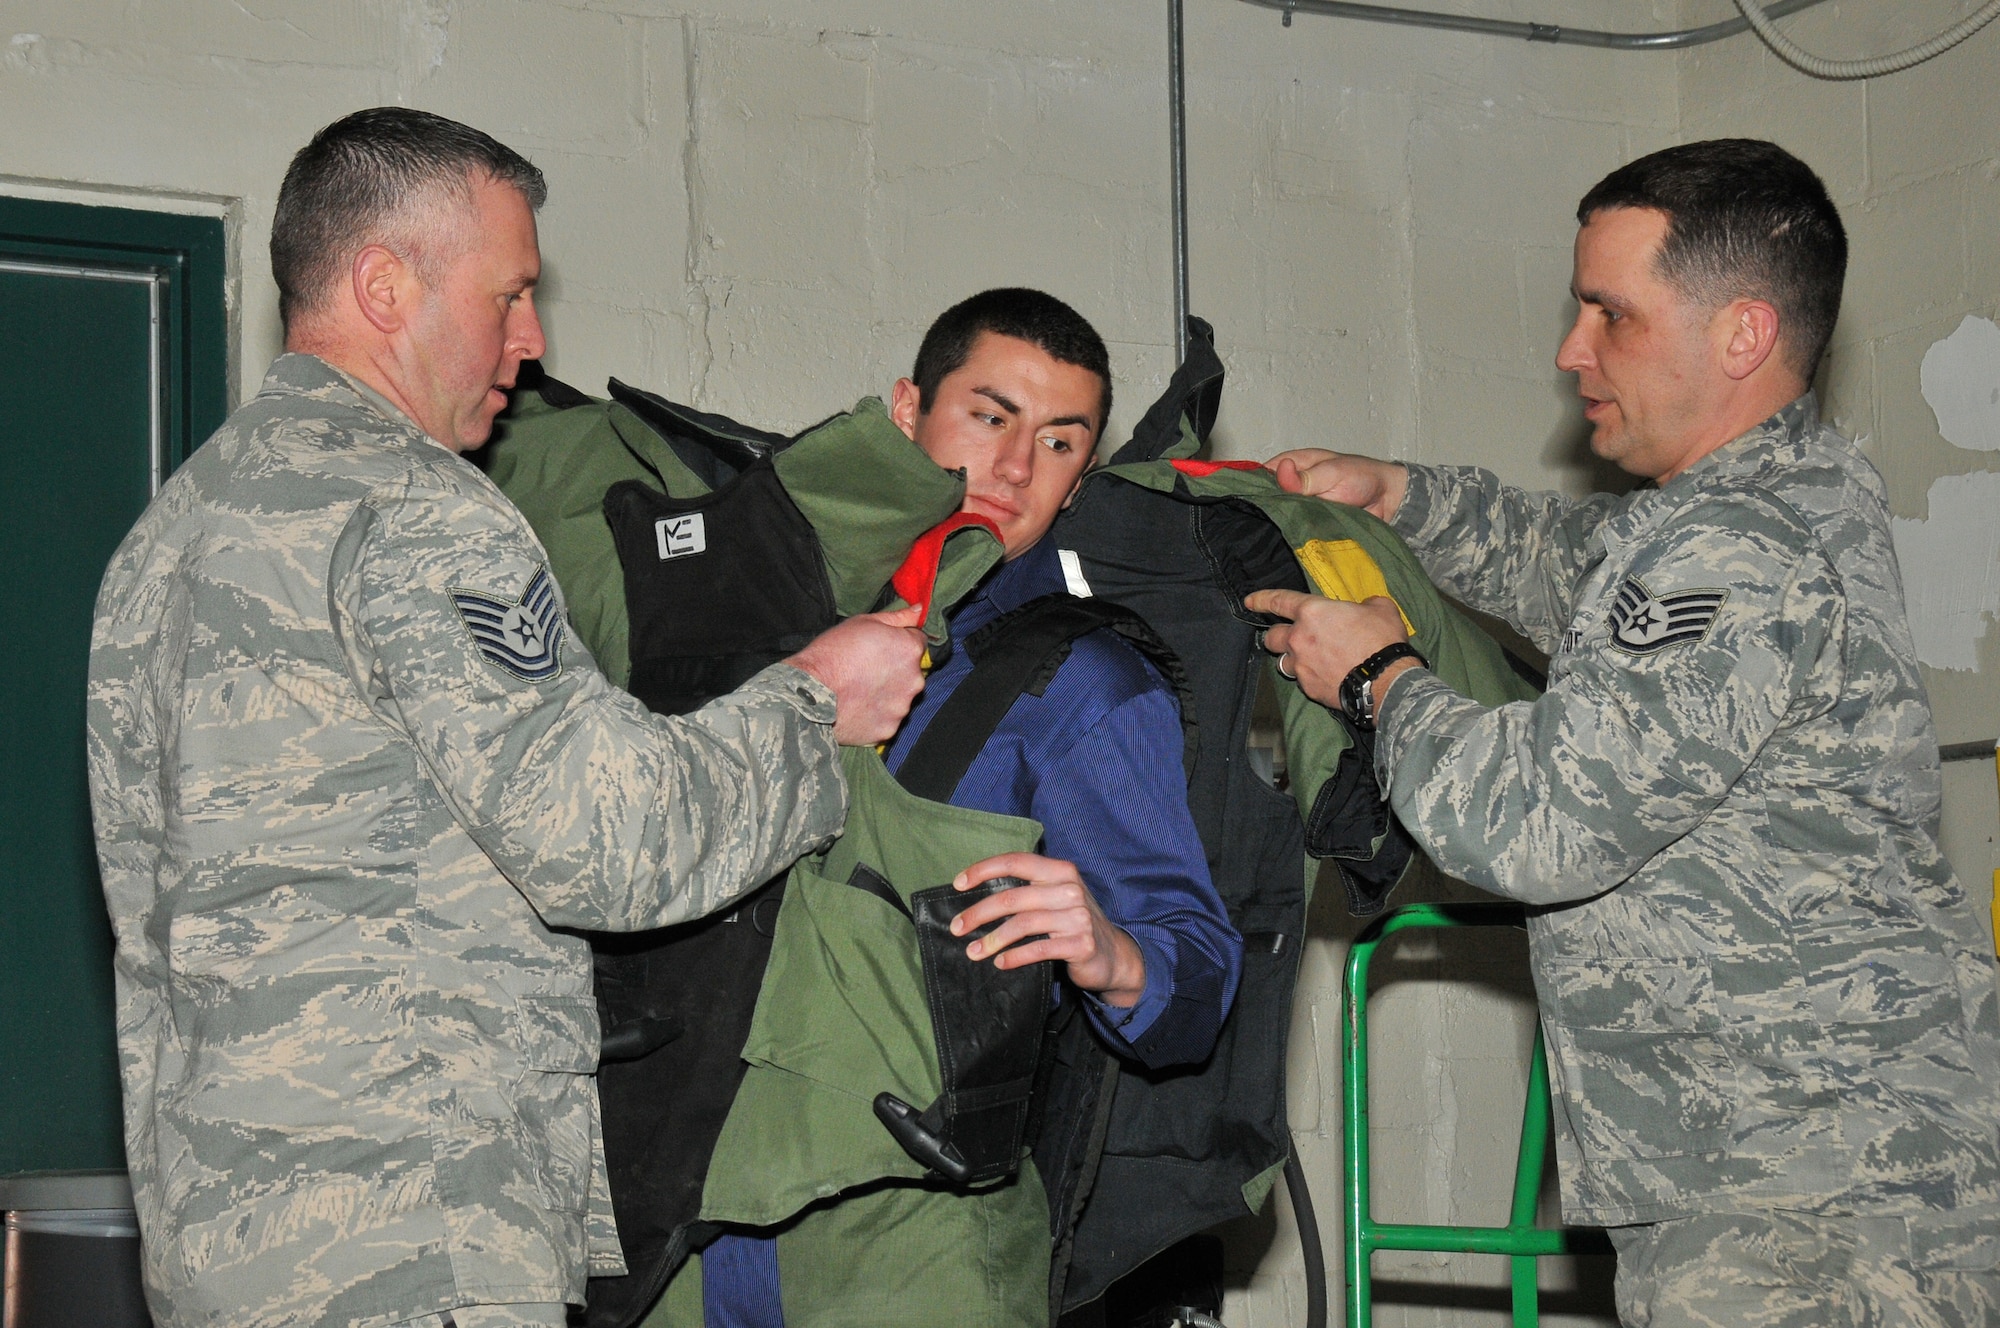 A picture of Tech. Sgt. John Hurley and Staff Sgt. Joseph Coates, 177th Fighter Wing Explosive Ordinance Disposal, assisting a member of a youth advisory council don of a bomb suit.